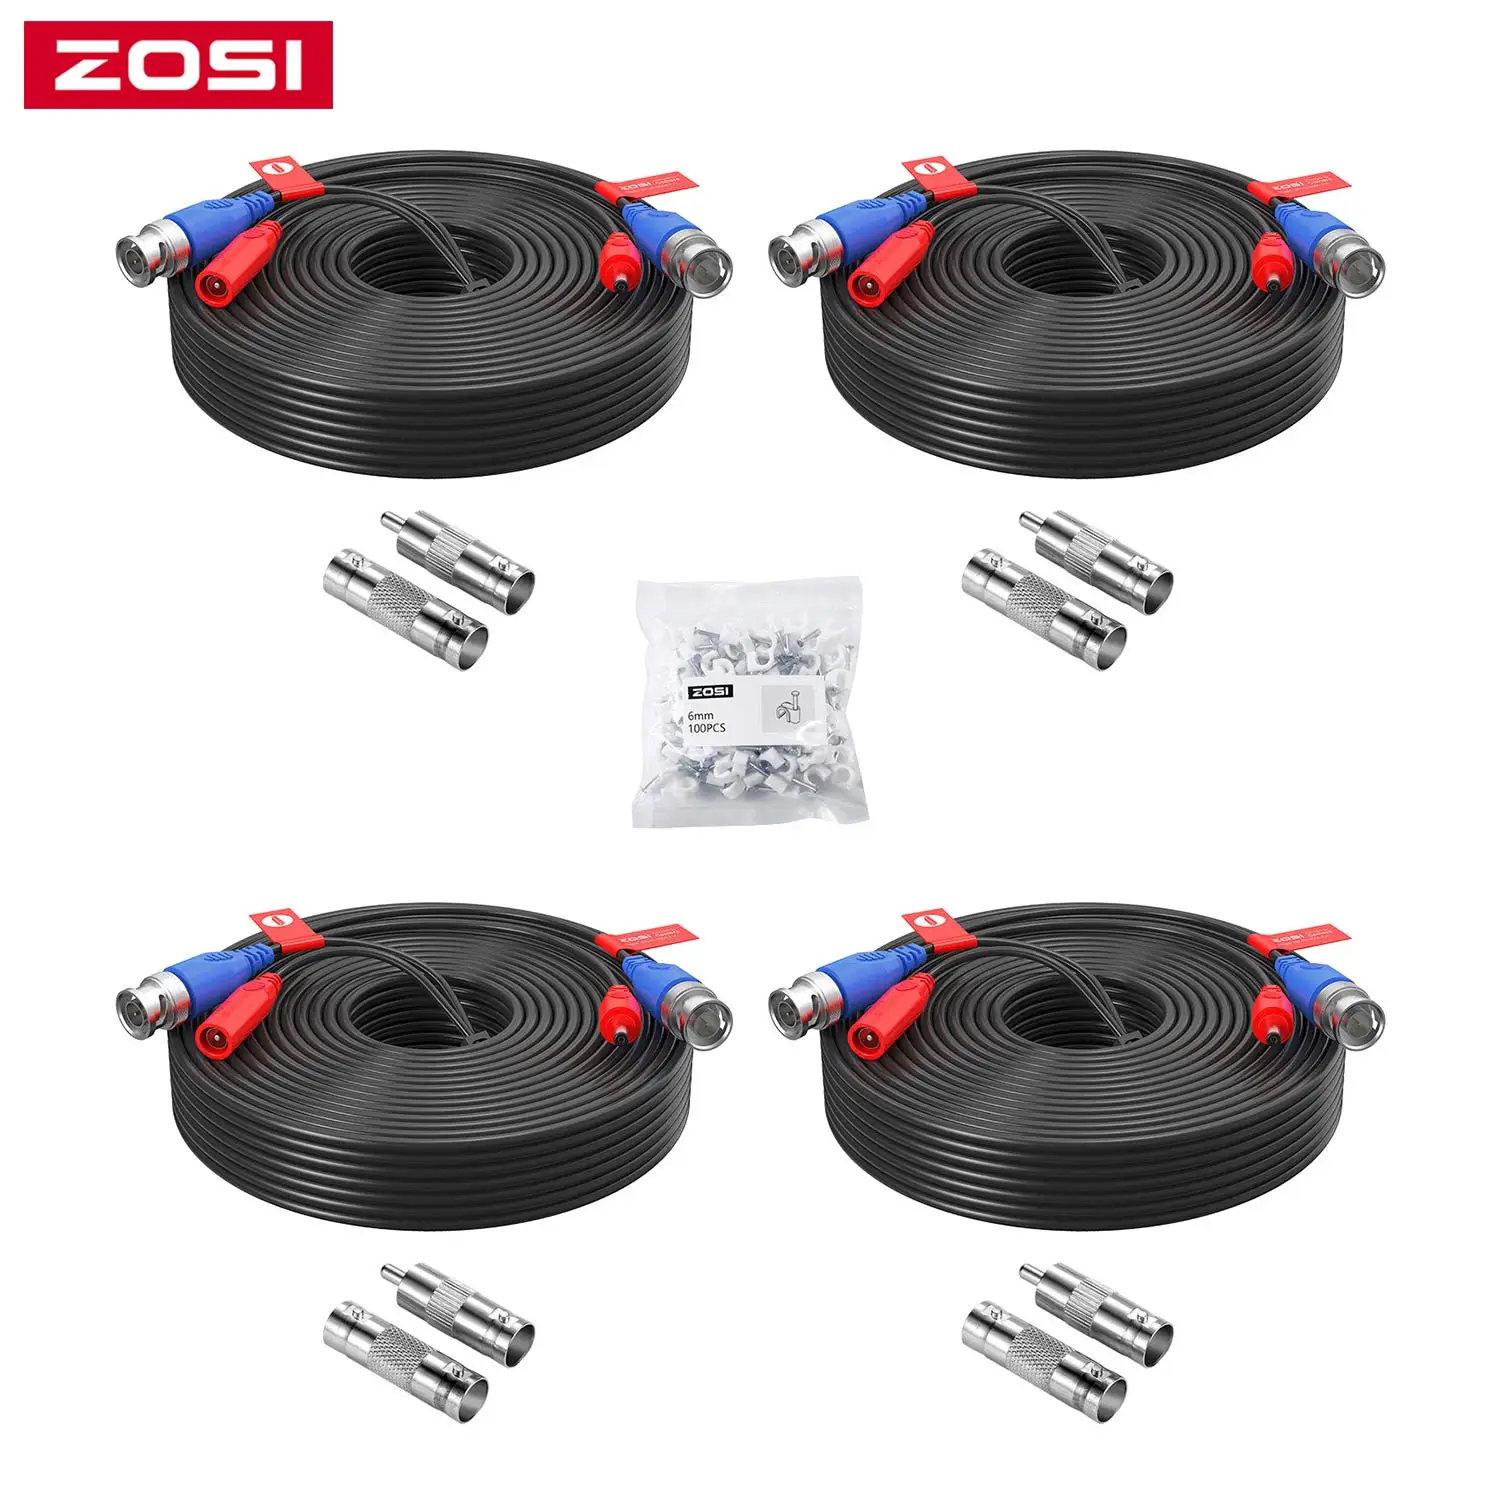 

ZOSI 4-Packed 18M 30M (60ft,100ft) CCTV Power Video BNC + DC plug cable for CCTV Camera and DVR system Coaxial Cable